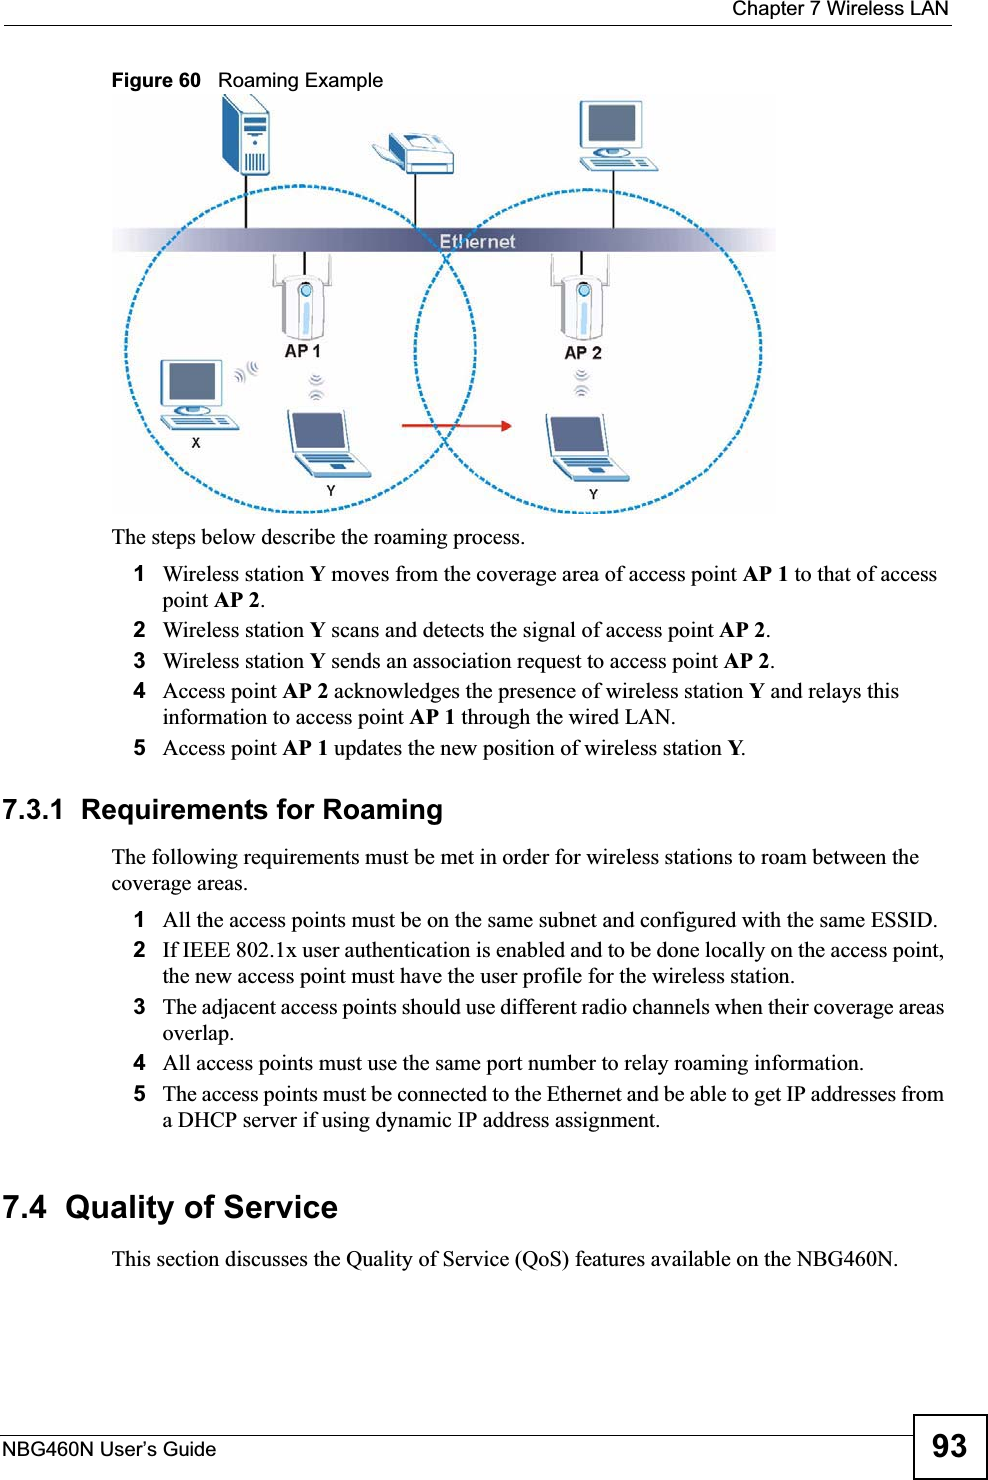  Chapter 7 Wireless LANNBG460N User’s Guide 93Figure 60   Roaming ExampleThe steps below describe the roaming process.1Wireless station Y moves from the coverage area of access point AP 1 to that of access point AP 2.2Wireless station Y scans and detects the signal of access point AP 2.3Wireless station Y sends an association request to access point AP 2.4Access point AP 2 acknowledges the presence of wireless station Y and relays this information to access point AP 1 through the wired LAN. 5Access point AP 1 updates the new position of wireless station Y.7.3.1  Requirements for RoamingThe following requirements must be met in order for wireless stations to roam between the coverage areas. 1All the access points must be on the same subnet and configured with the same ESSID. 2If IEEE 802.1x user authentication is enabled and to be done locally on the access point, the new access point must have the user profile for the wireless station.3The adjacent access points should use different radio channels when their coverage areas overlap. 4All access points must use the same port number to relay roaming information. 5The access points must be connected to the Ethernet and be able to get IP addresses from a DHCP server if using dynamic IP address assignment. 7.4  Quality of ServiceThis section discusses the Quality of Service (QoS) features available on the NBG460N.